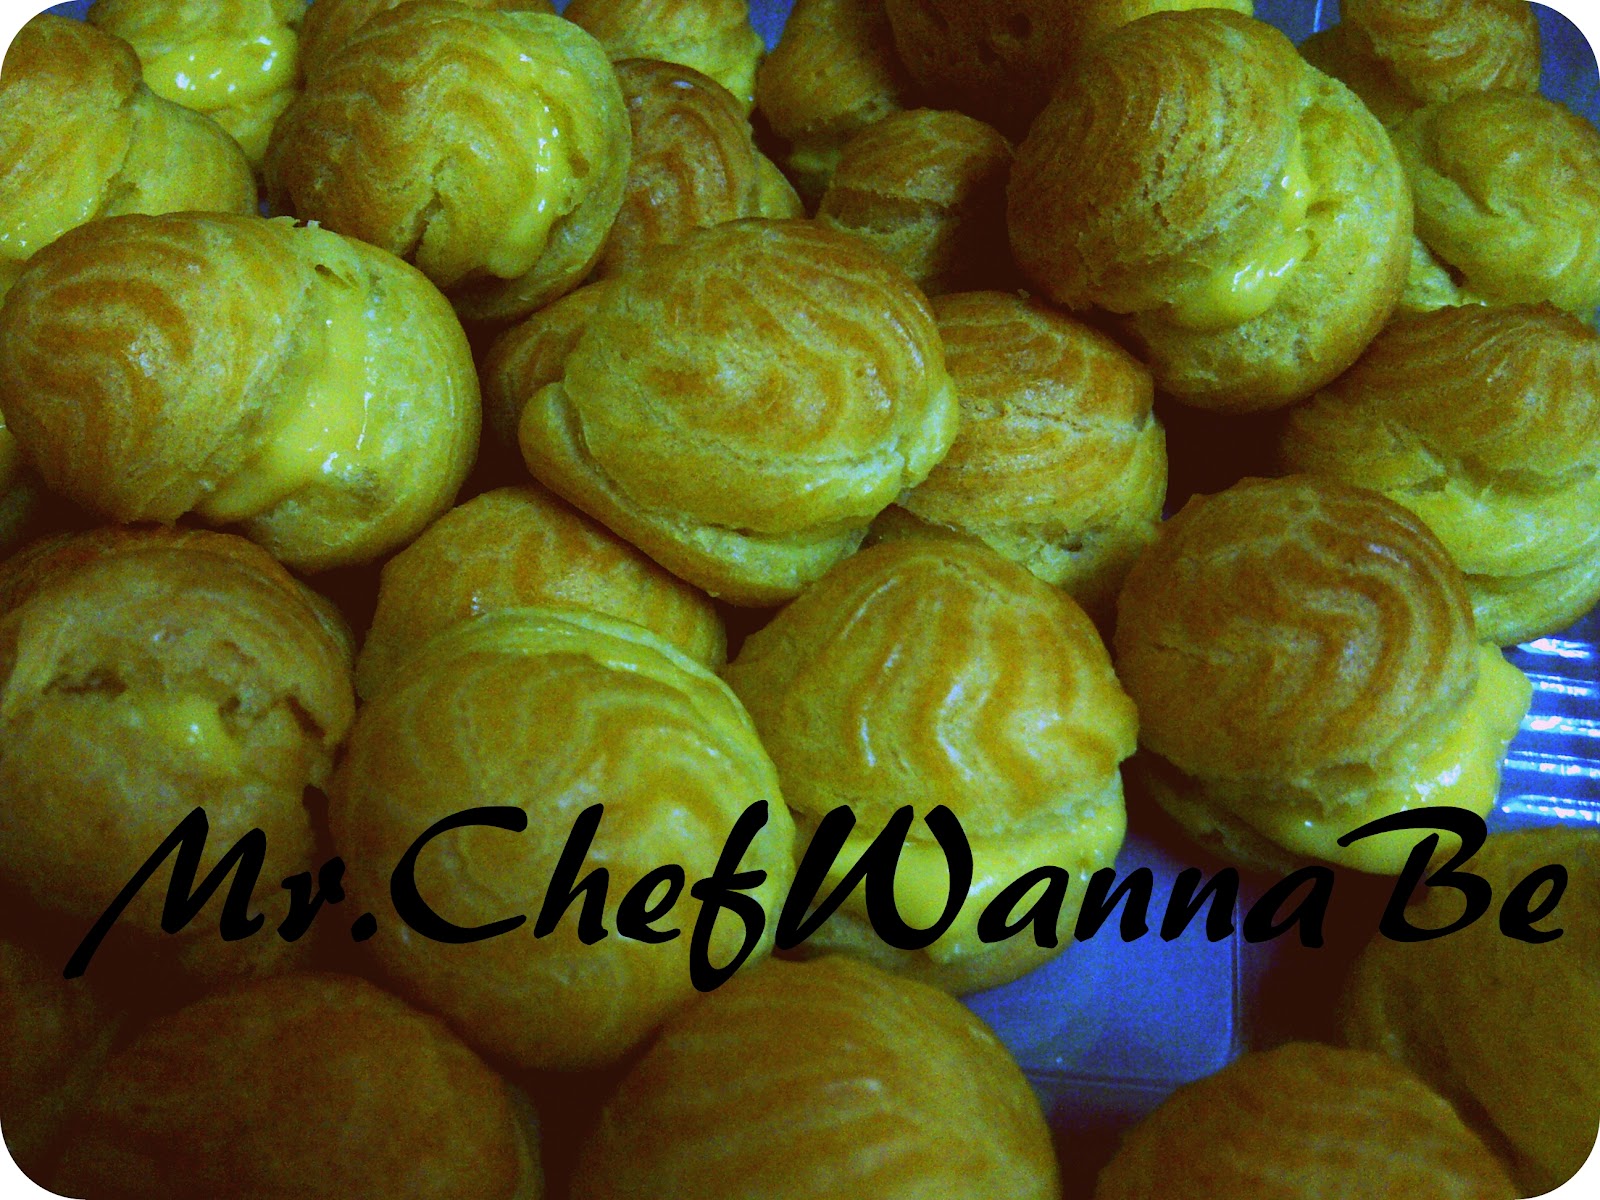 Resepi Cream Puff Filling Coklat - Quotes About h